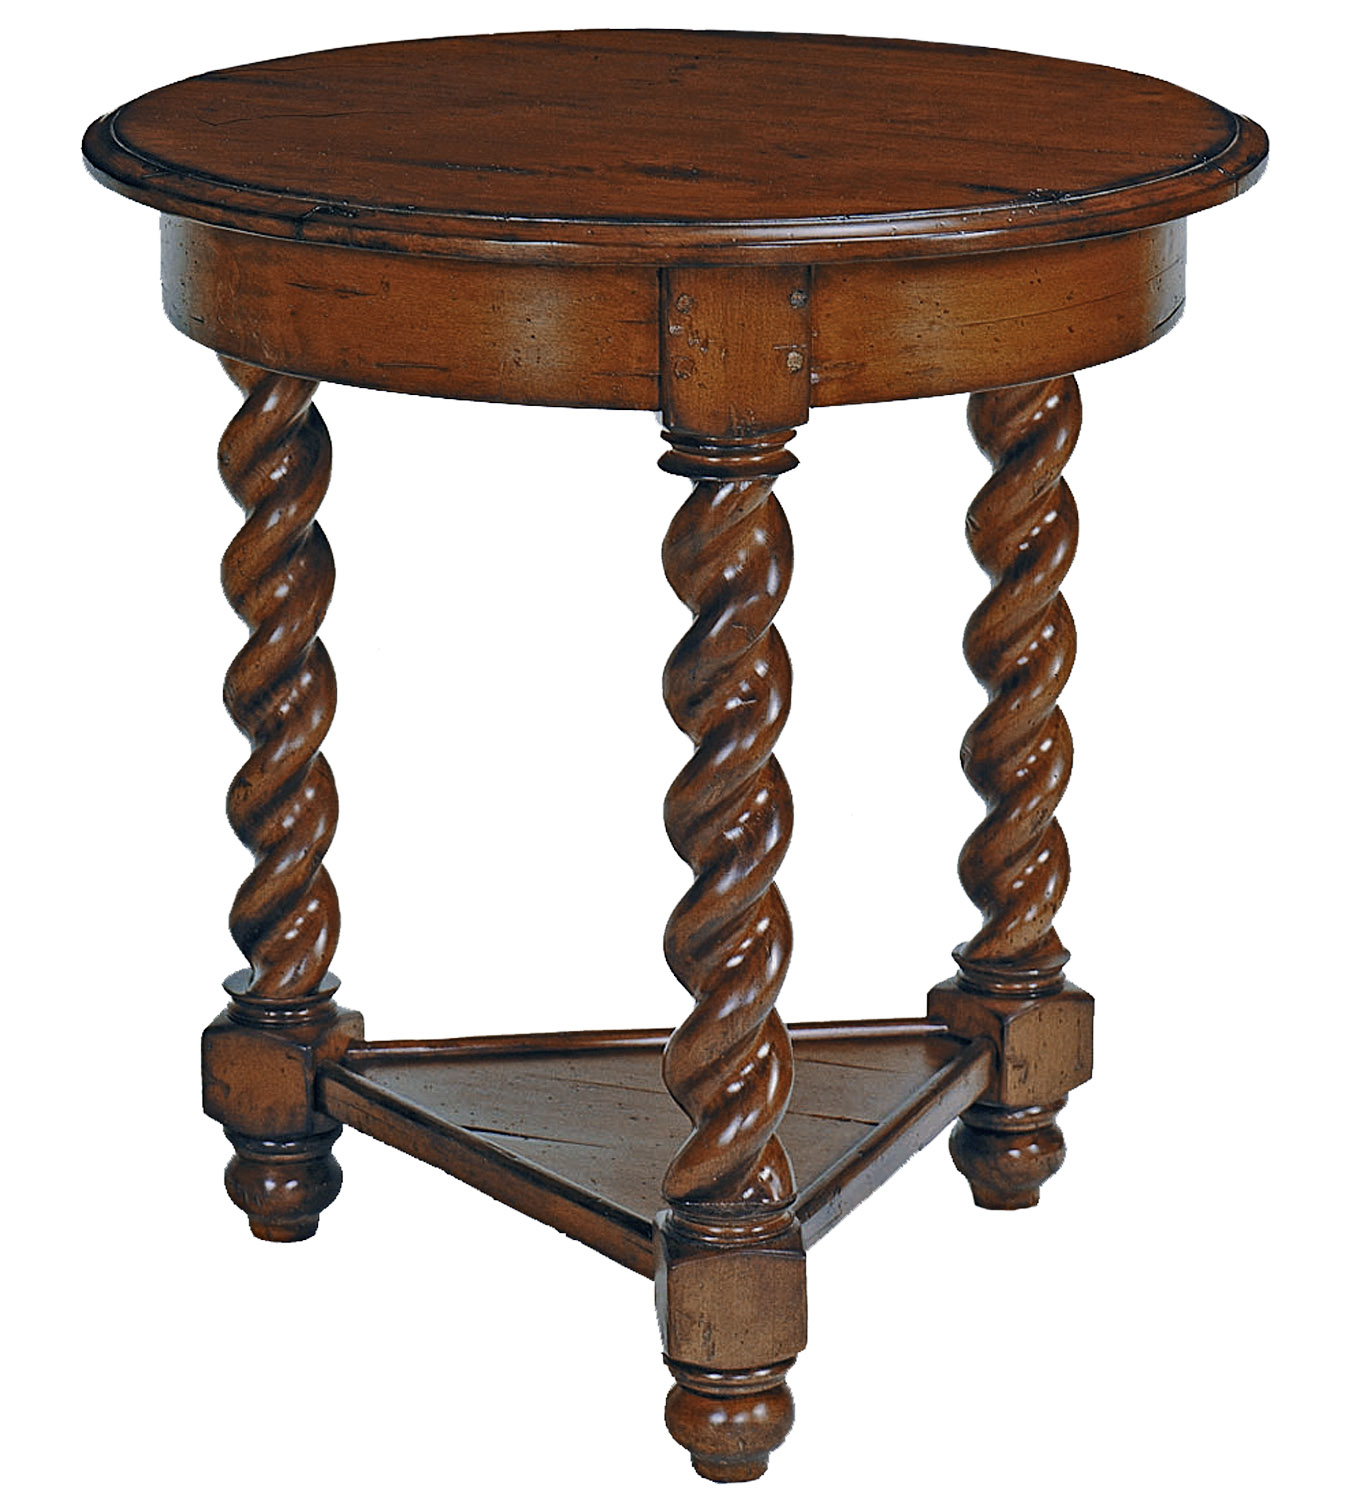 Rainier traditional round side or end table with spindle turned legs and bottom shelf by Woodland furniture in Idaho Falls